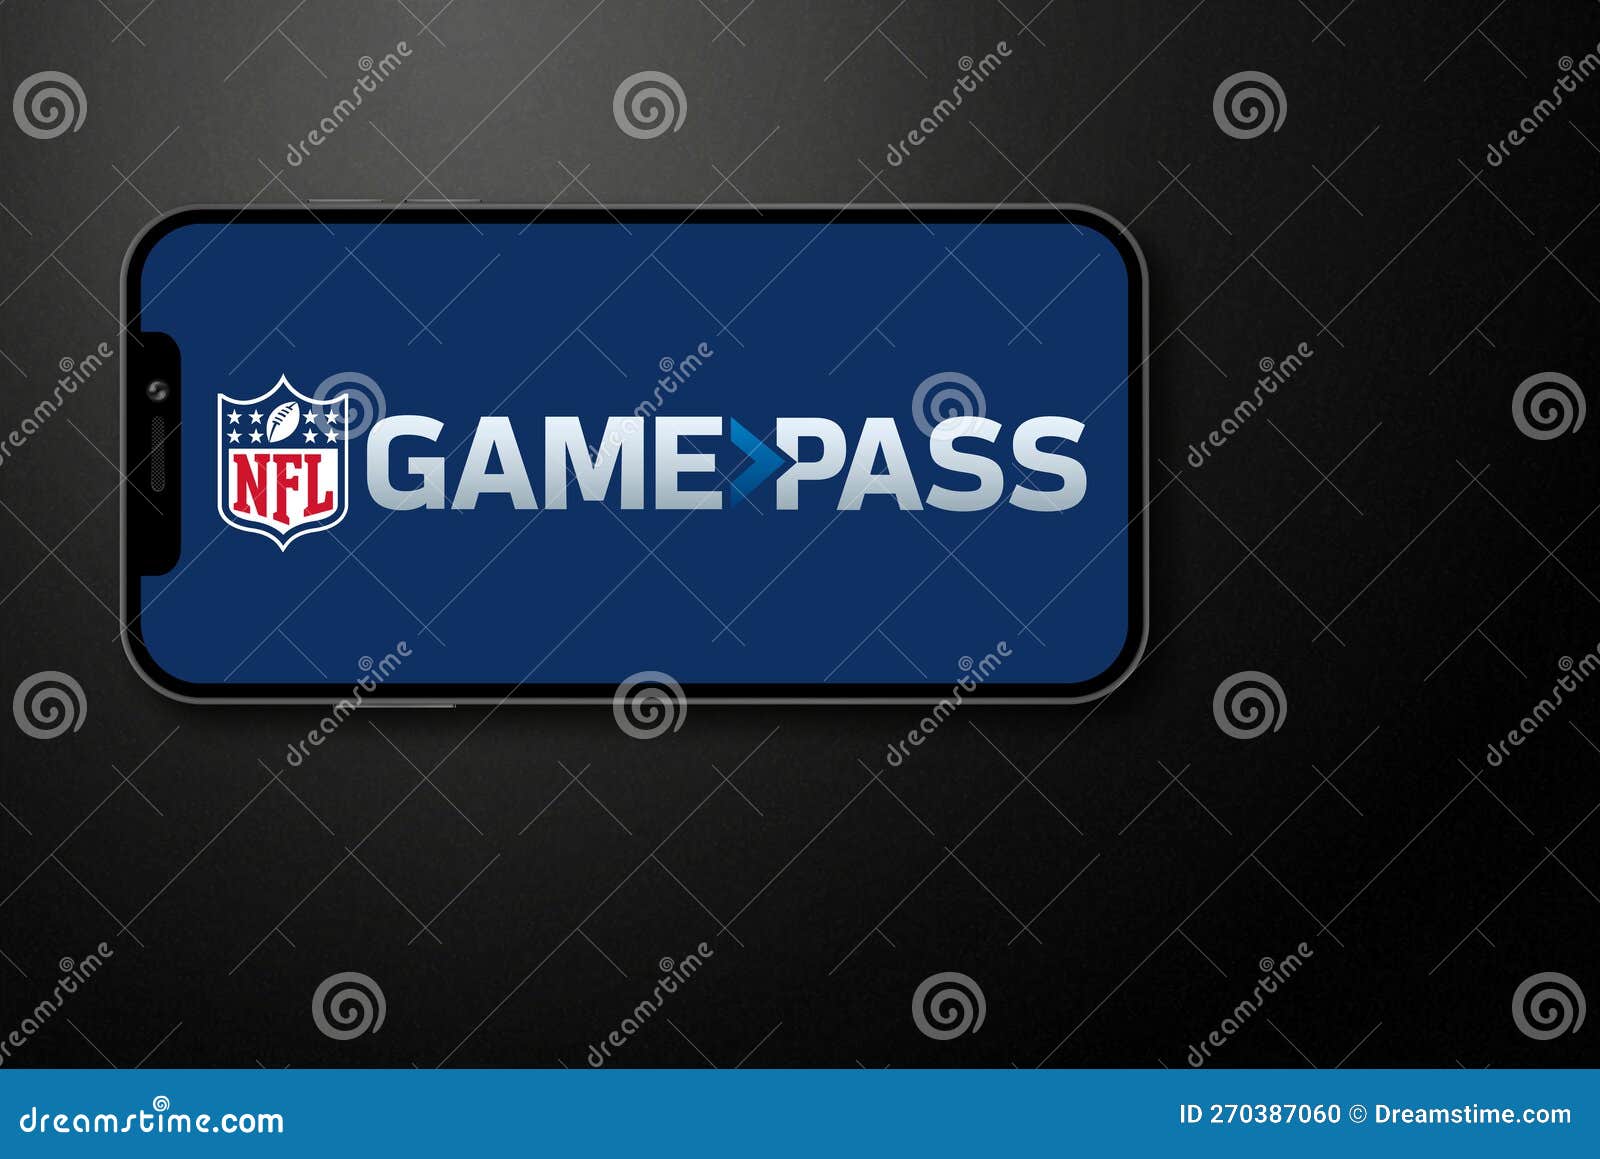 NFL Games Pass Logo on Smartphone Screen Editorial Image